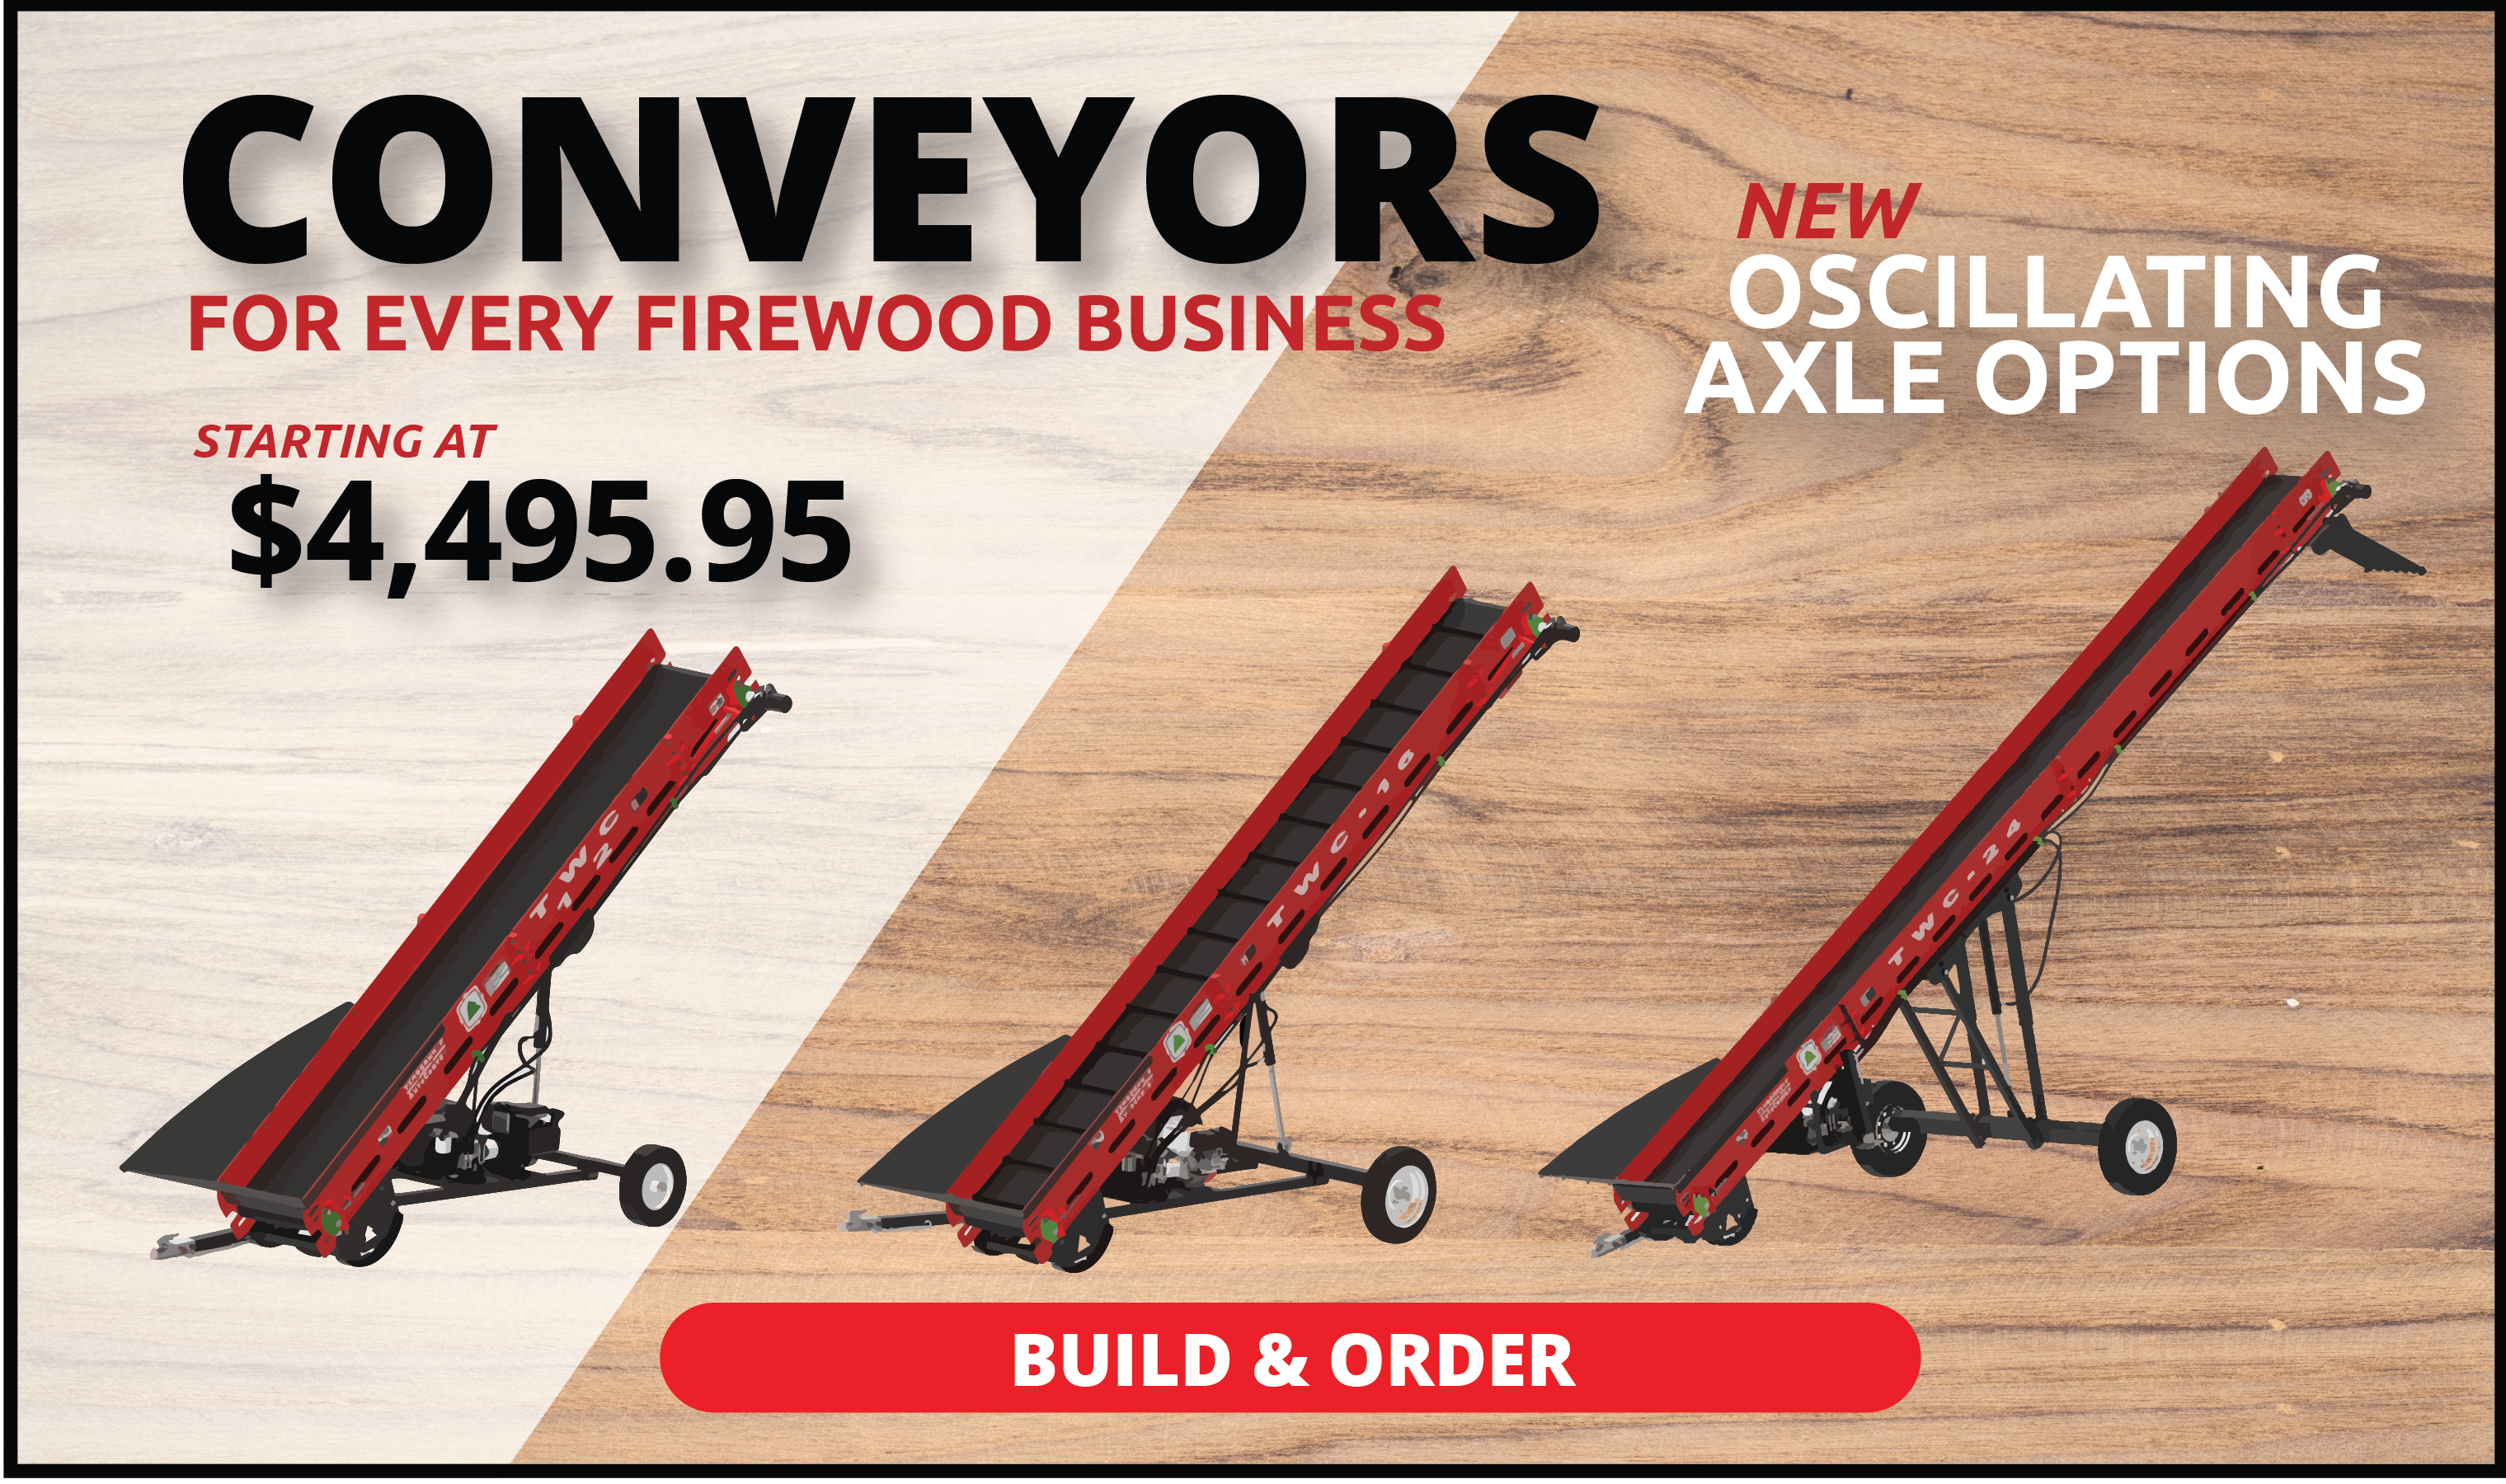 Timberwolf Manufactures Firewood Conveyors Ranging from 12 to 32 feet